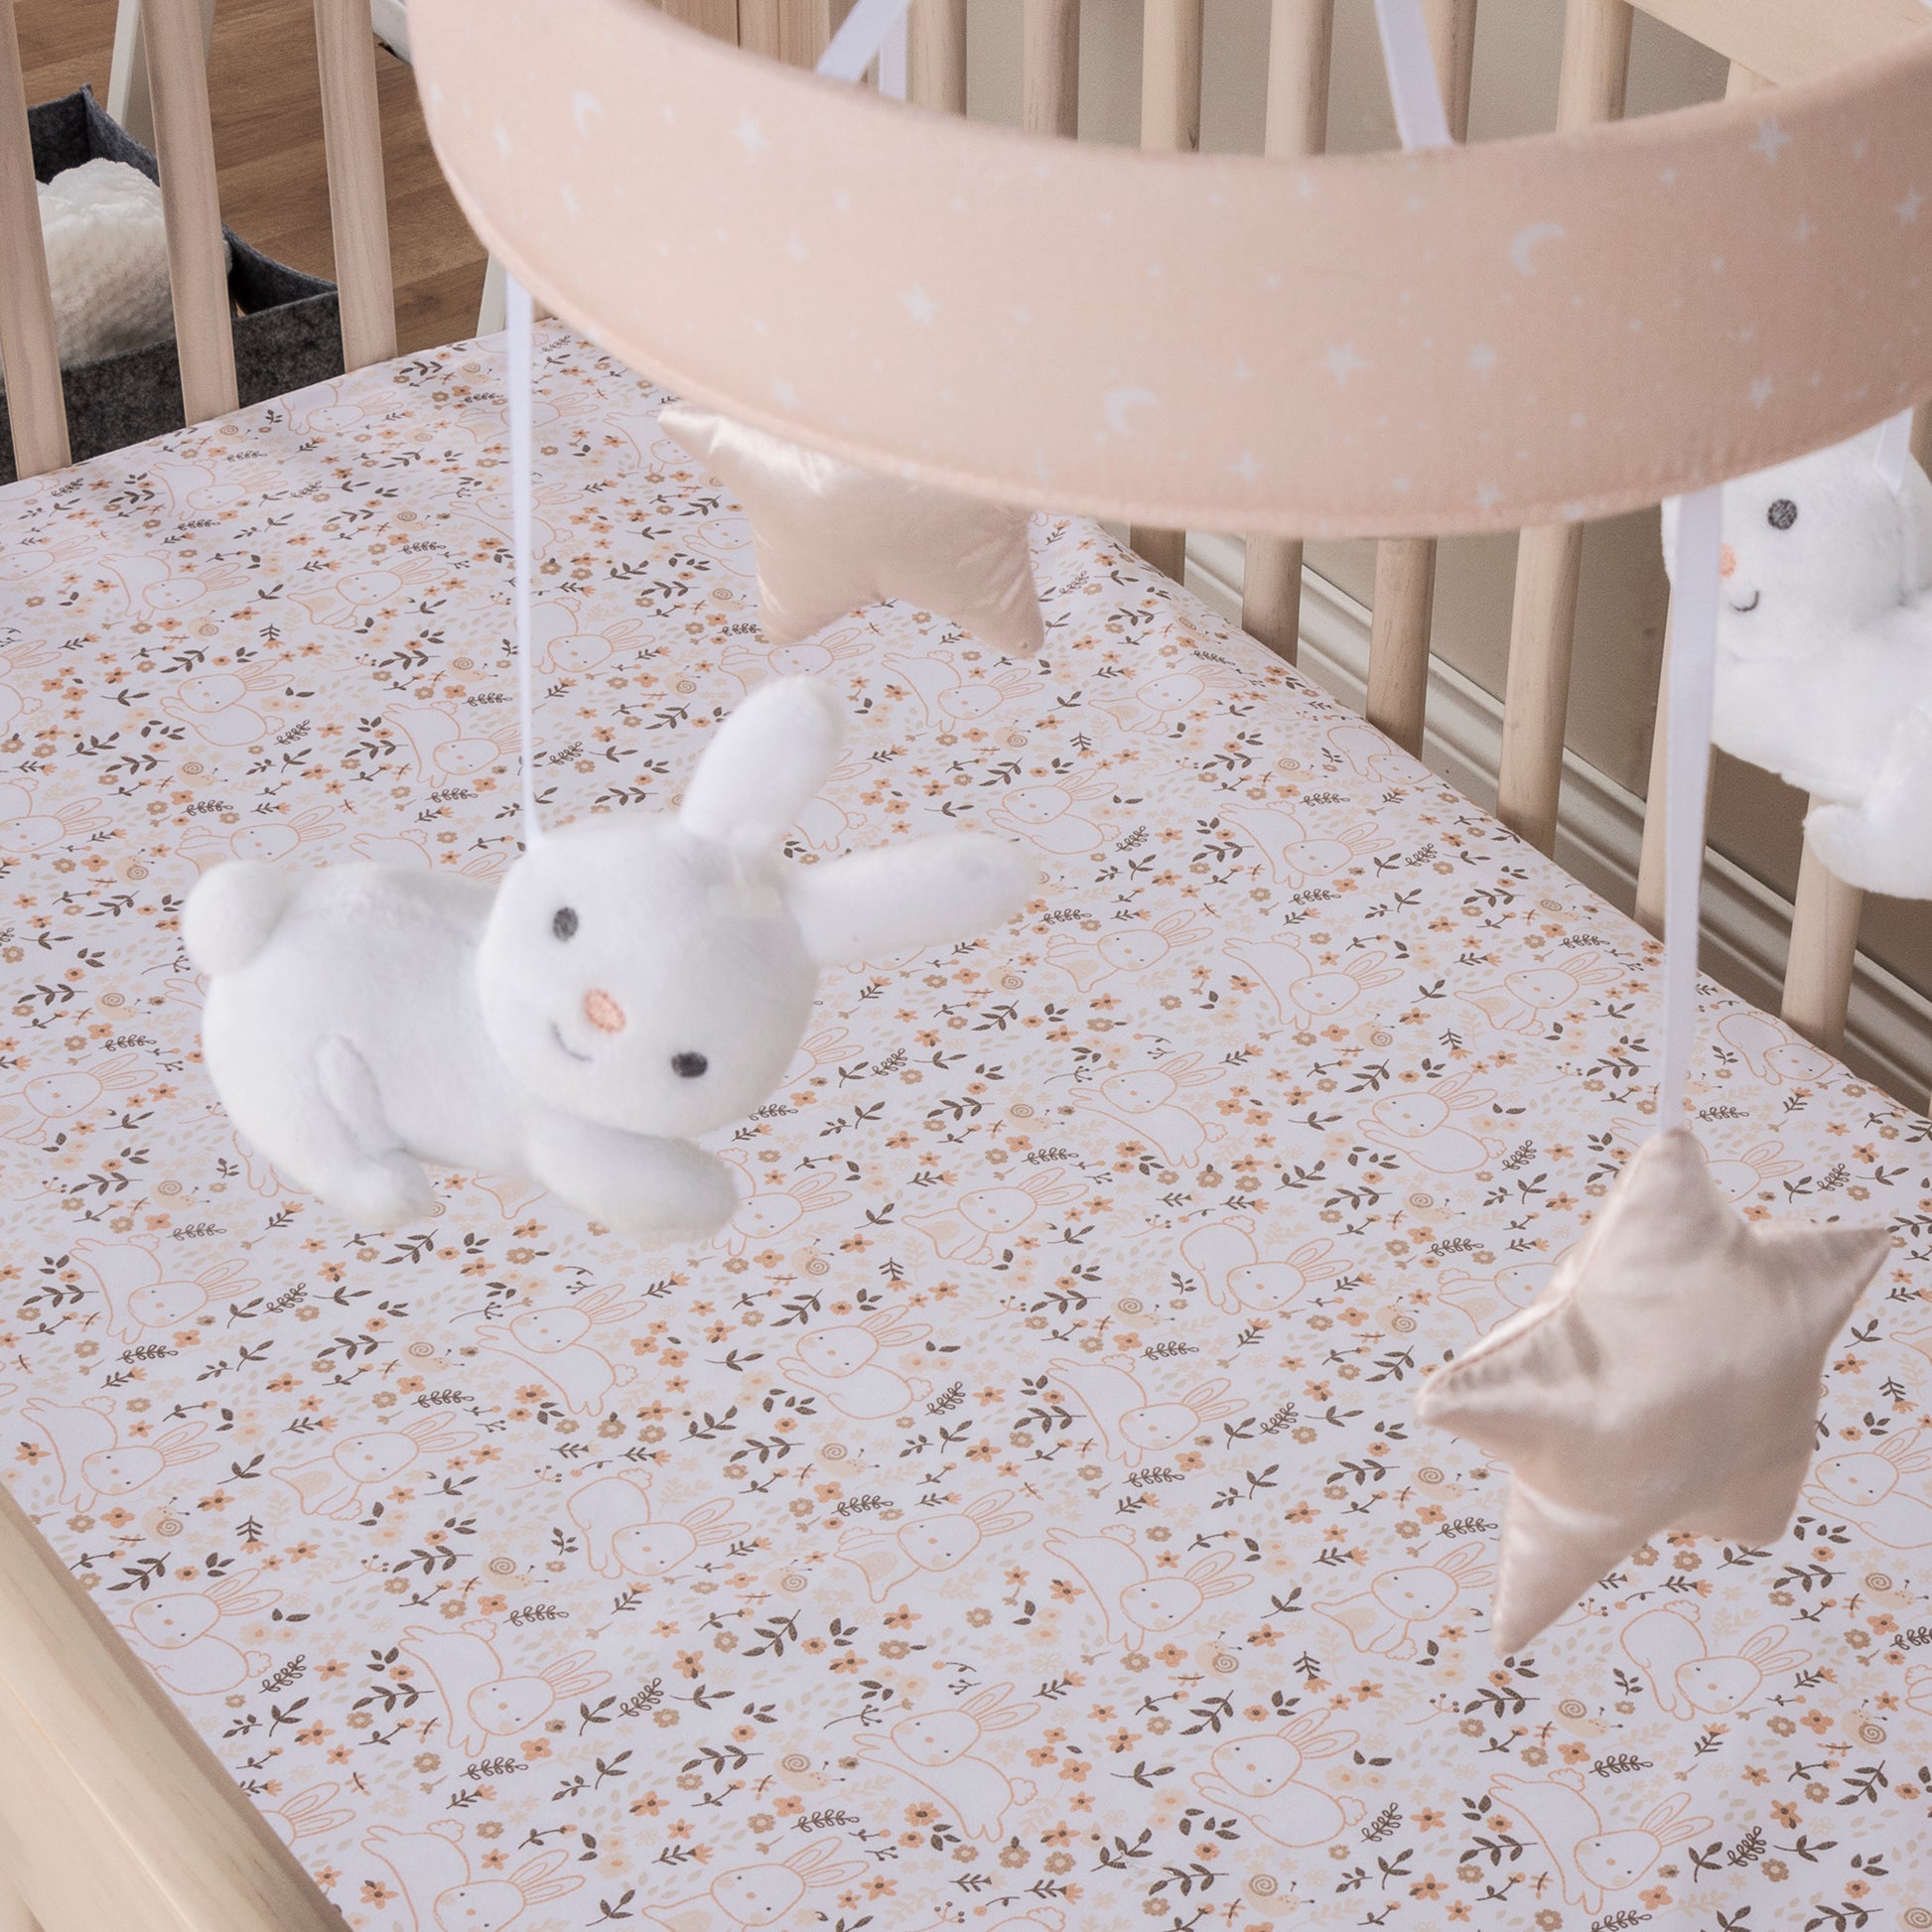  Stylized image of cottage floral crib sheet with coordinating bunny mobile by sammy and lou sold separately